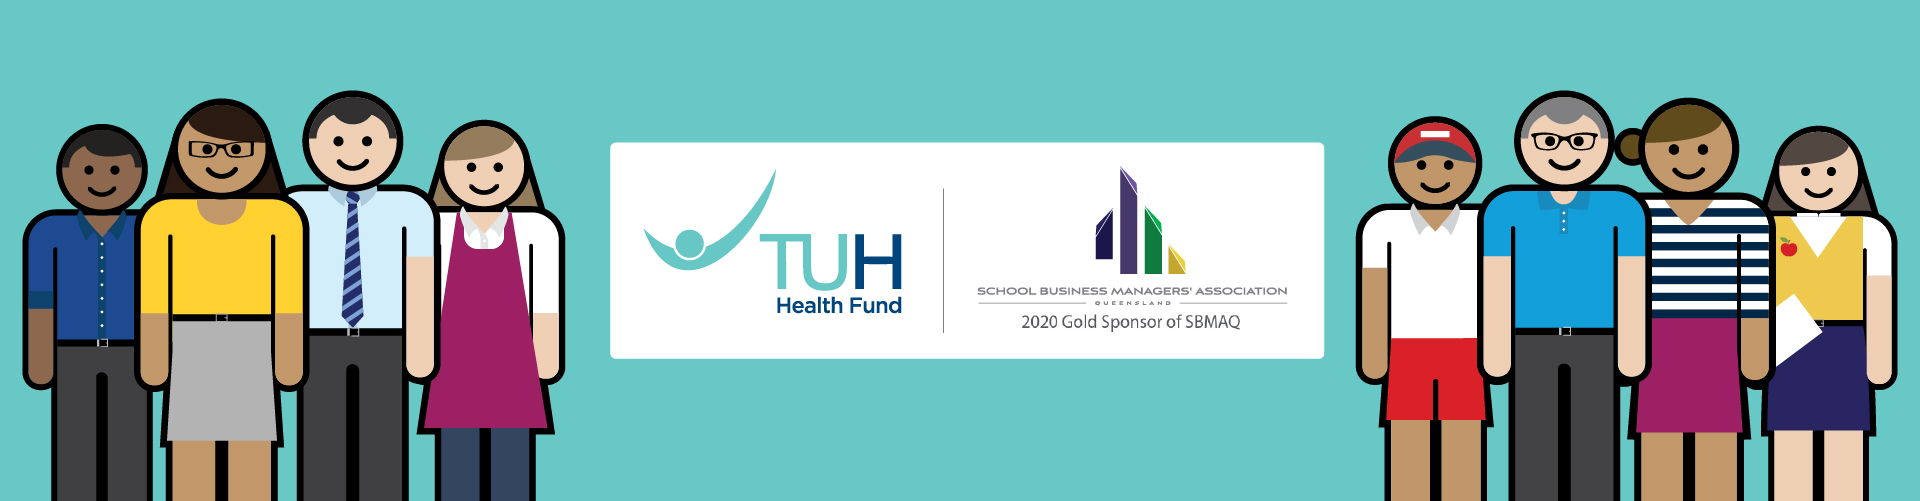 TUH health fund and school business managers' associated logo banner